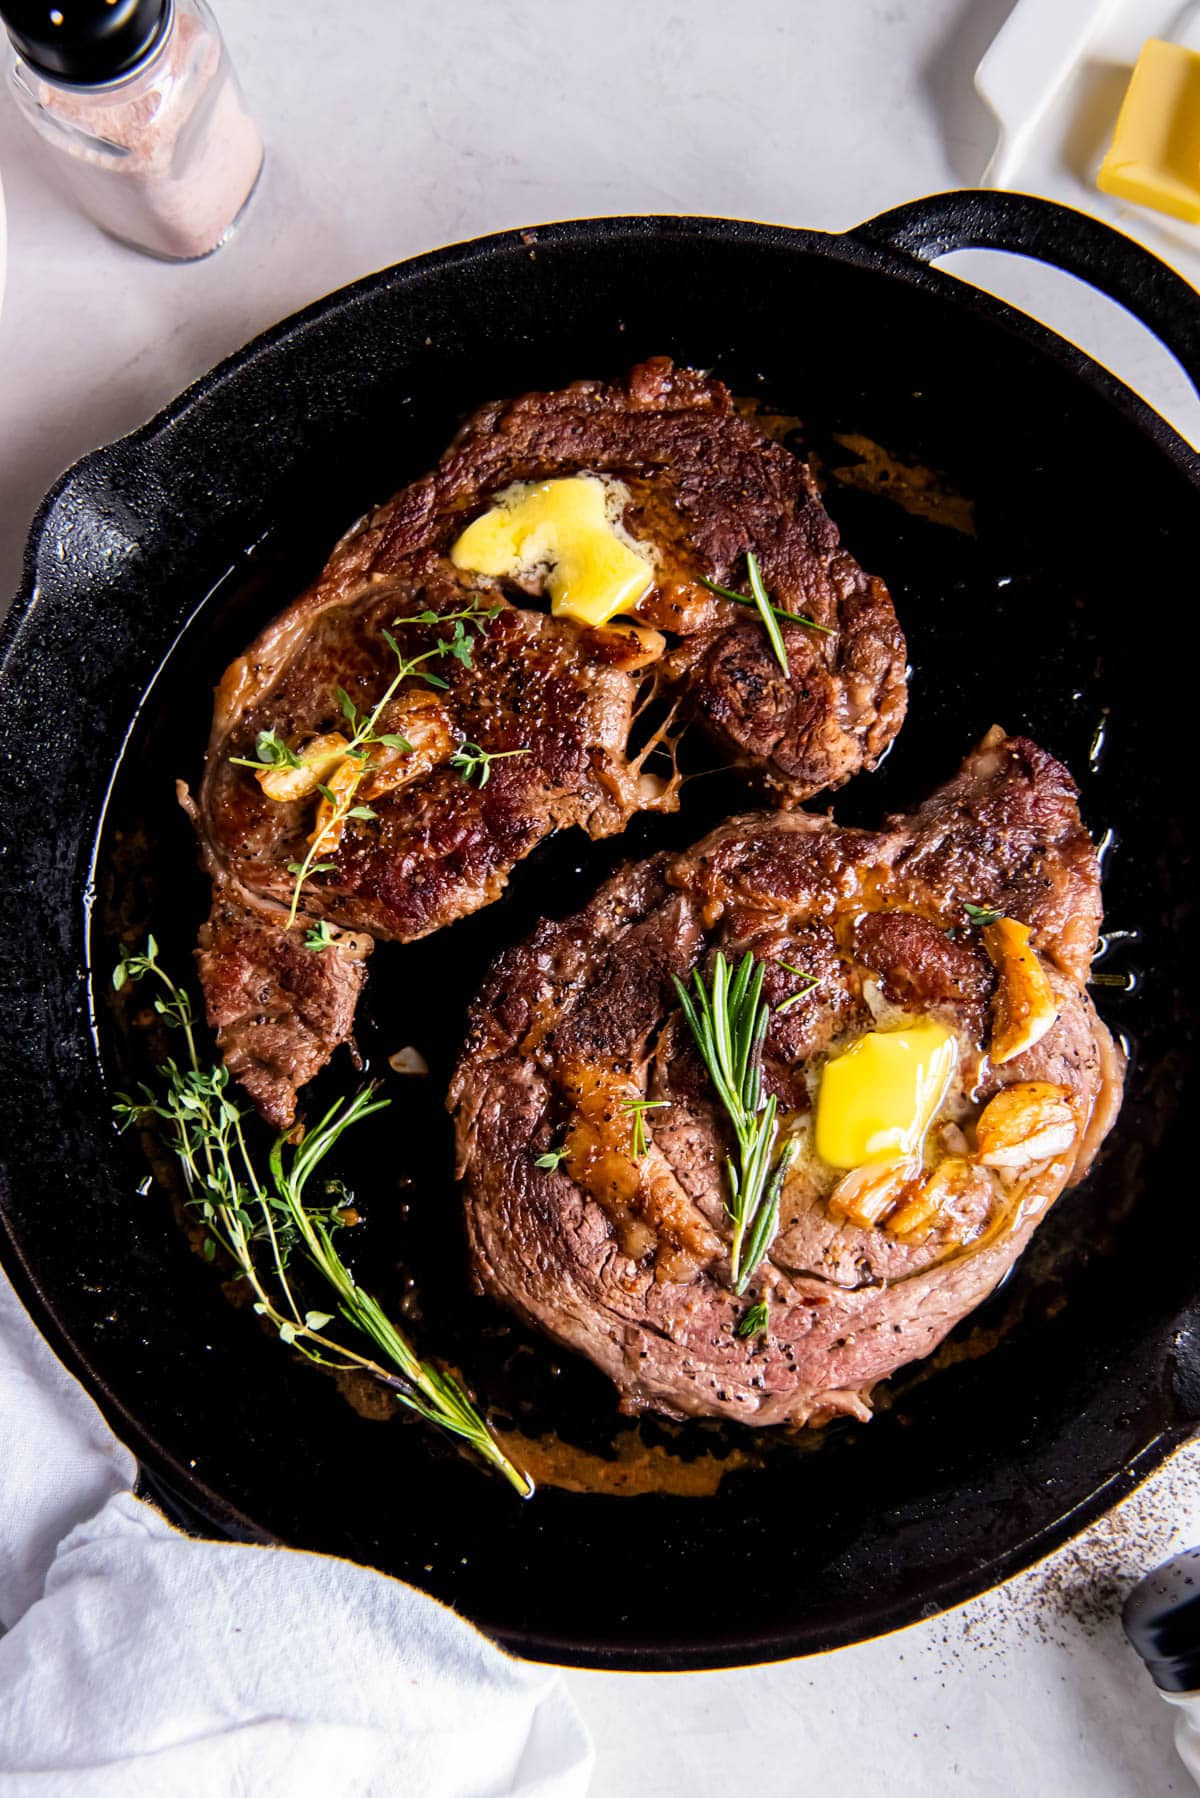 Two pan seared ribeye steaks in a cast iron skillet with a slice of melted butter and fresh rosemary on top.